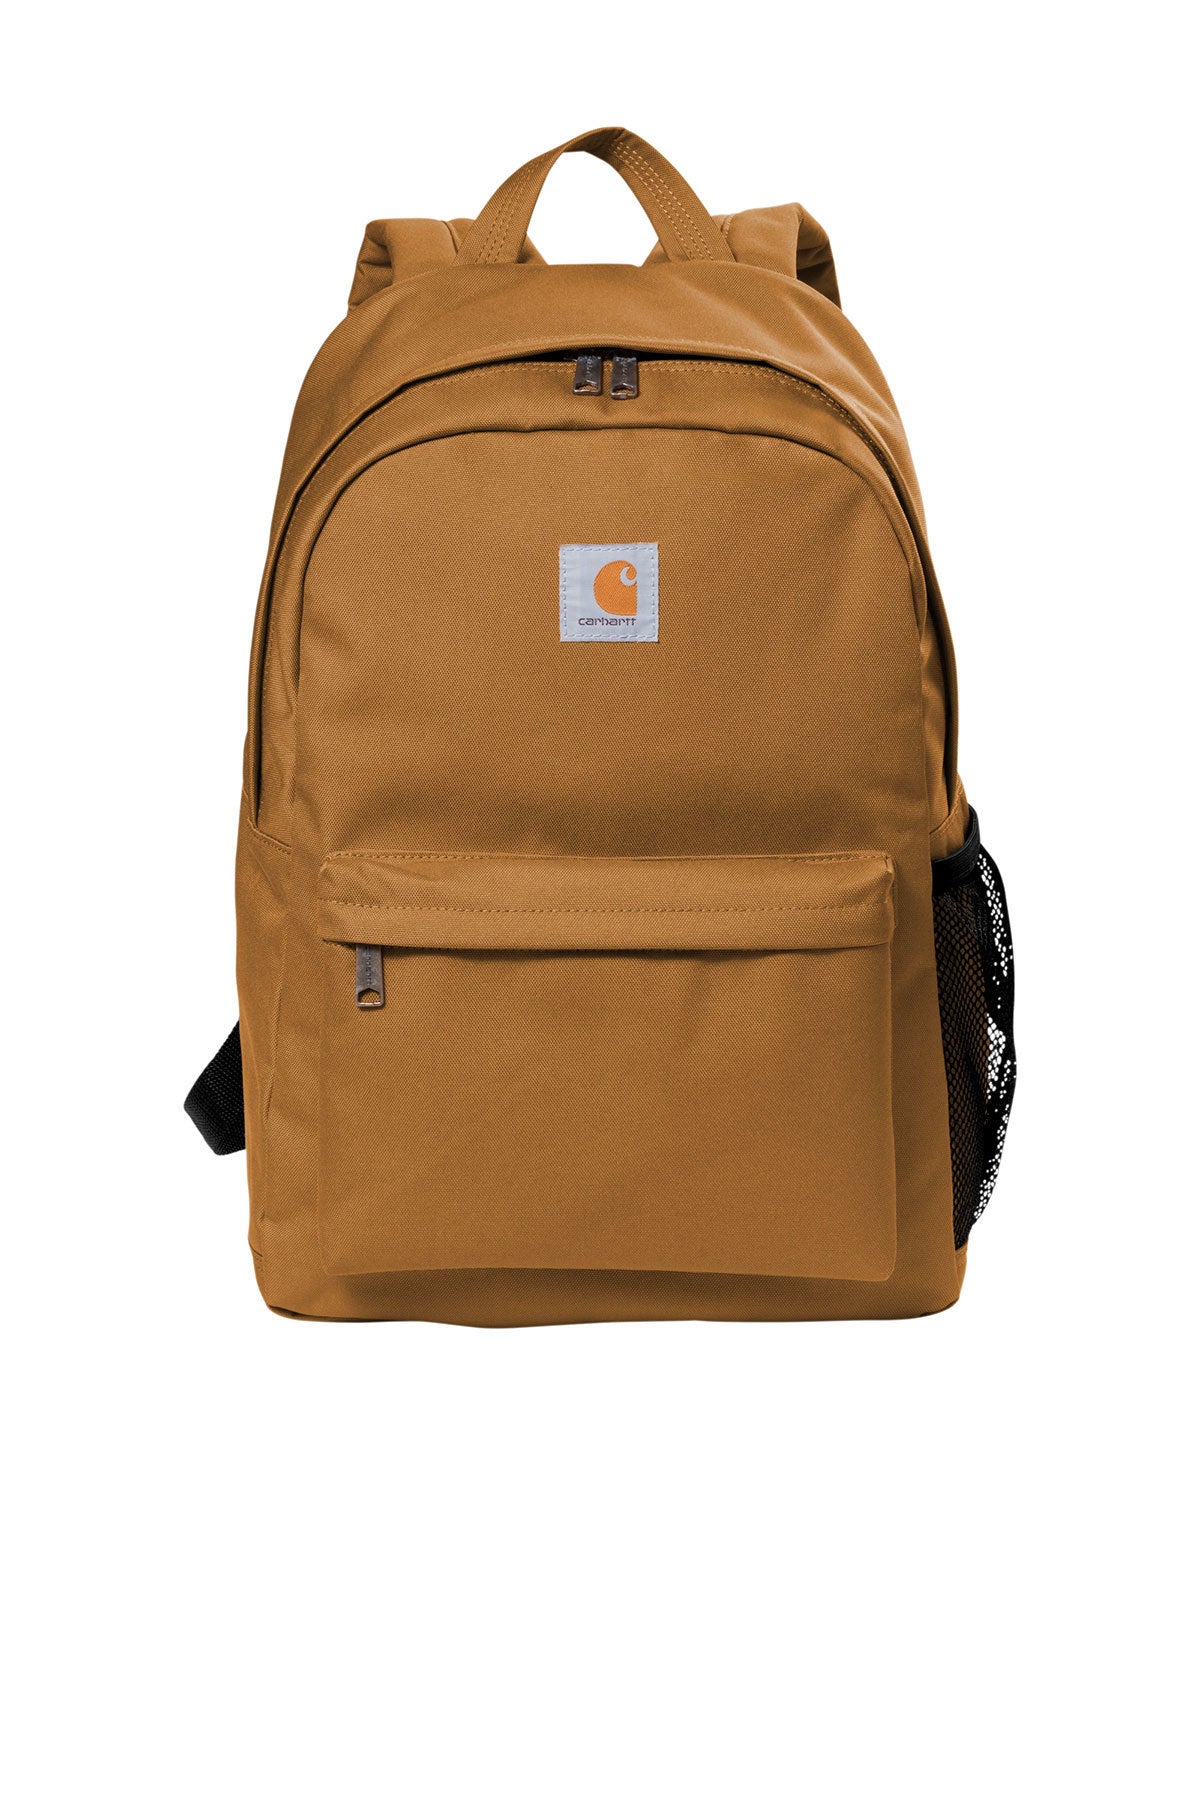 Carhartt® - Canvas Backpack - CT89241804